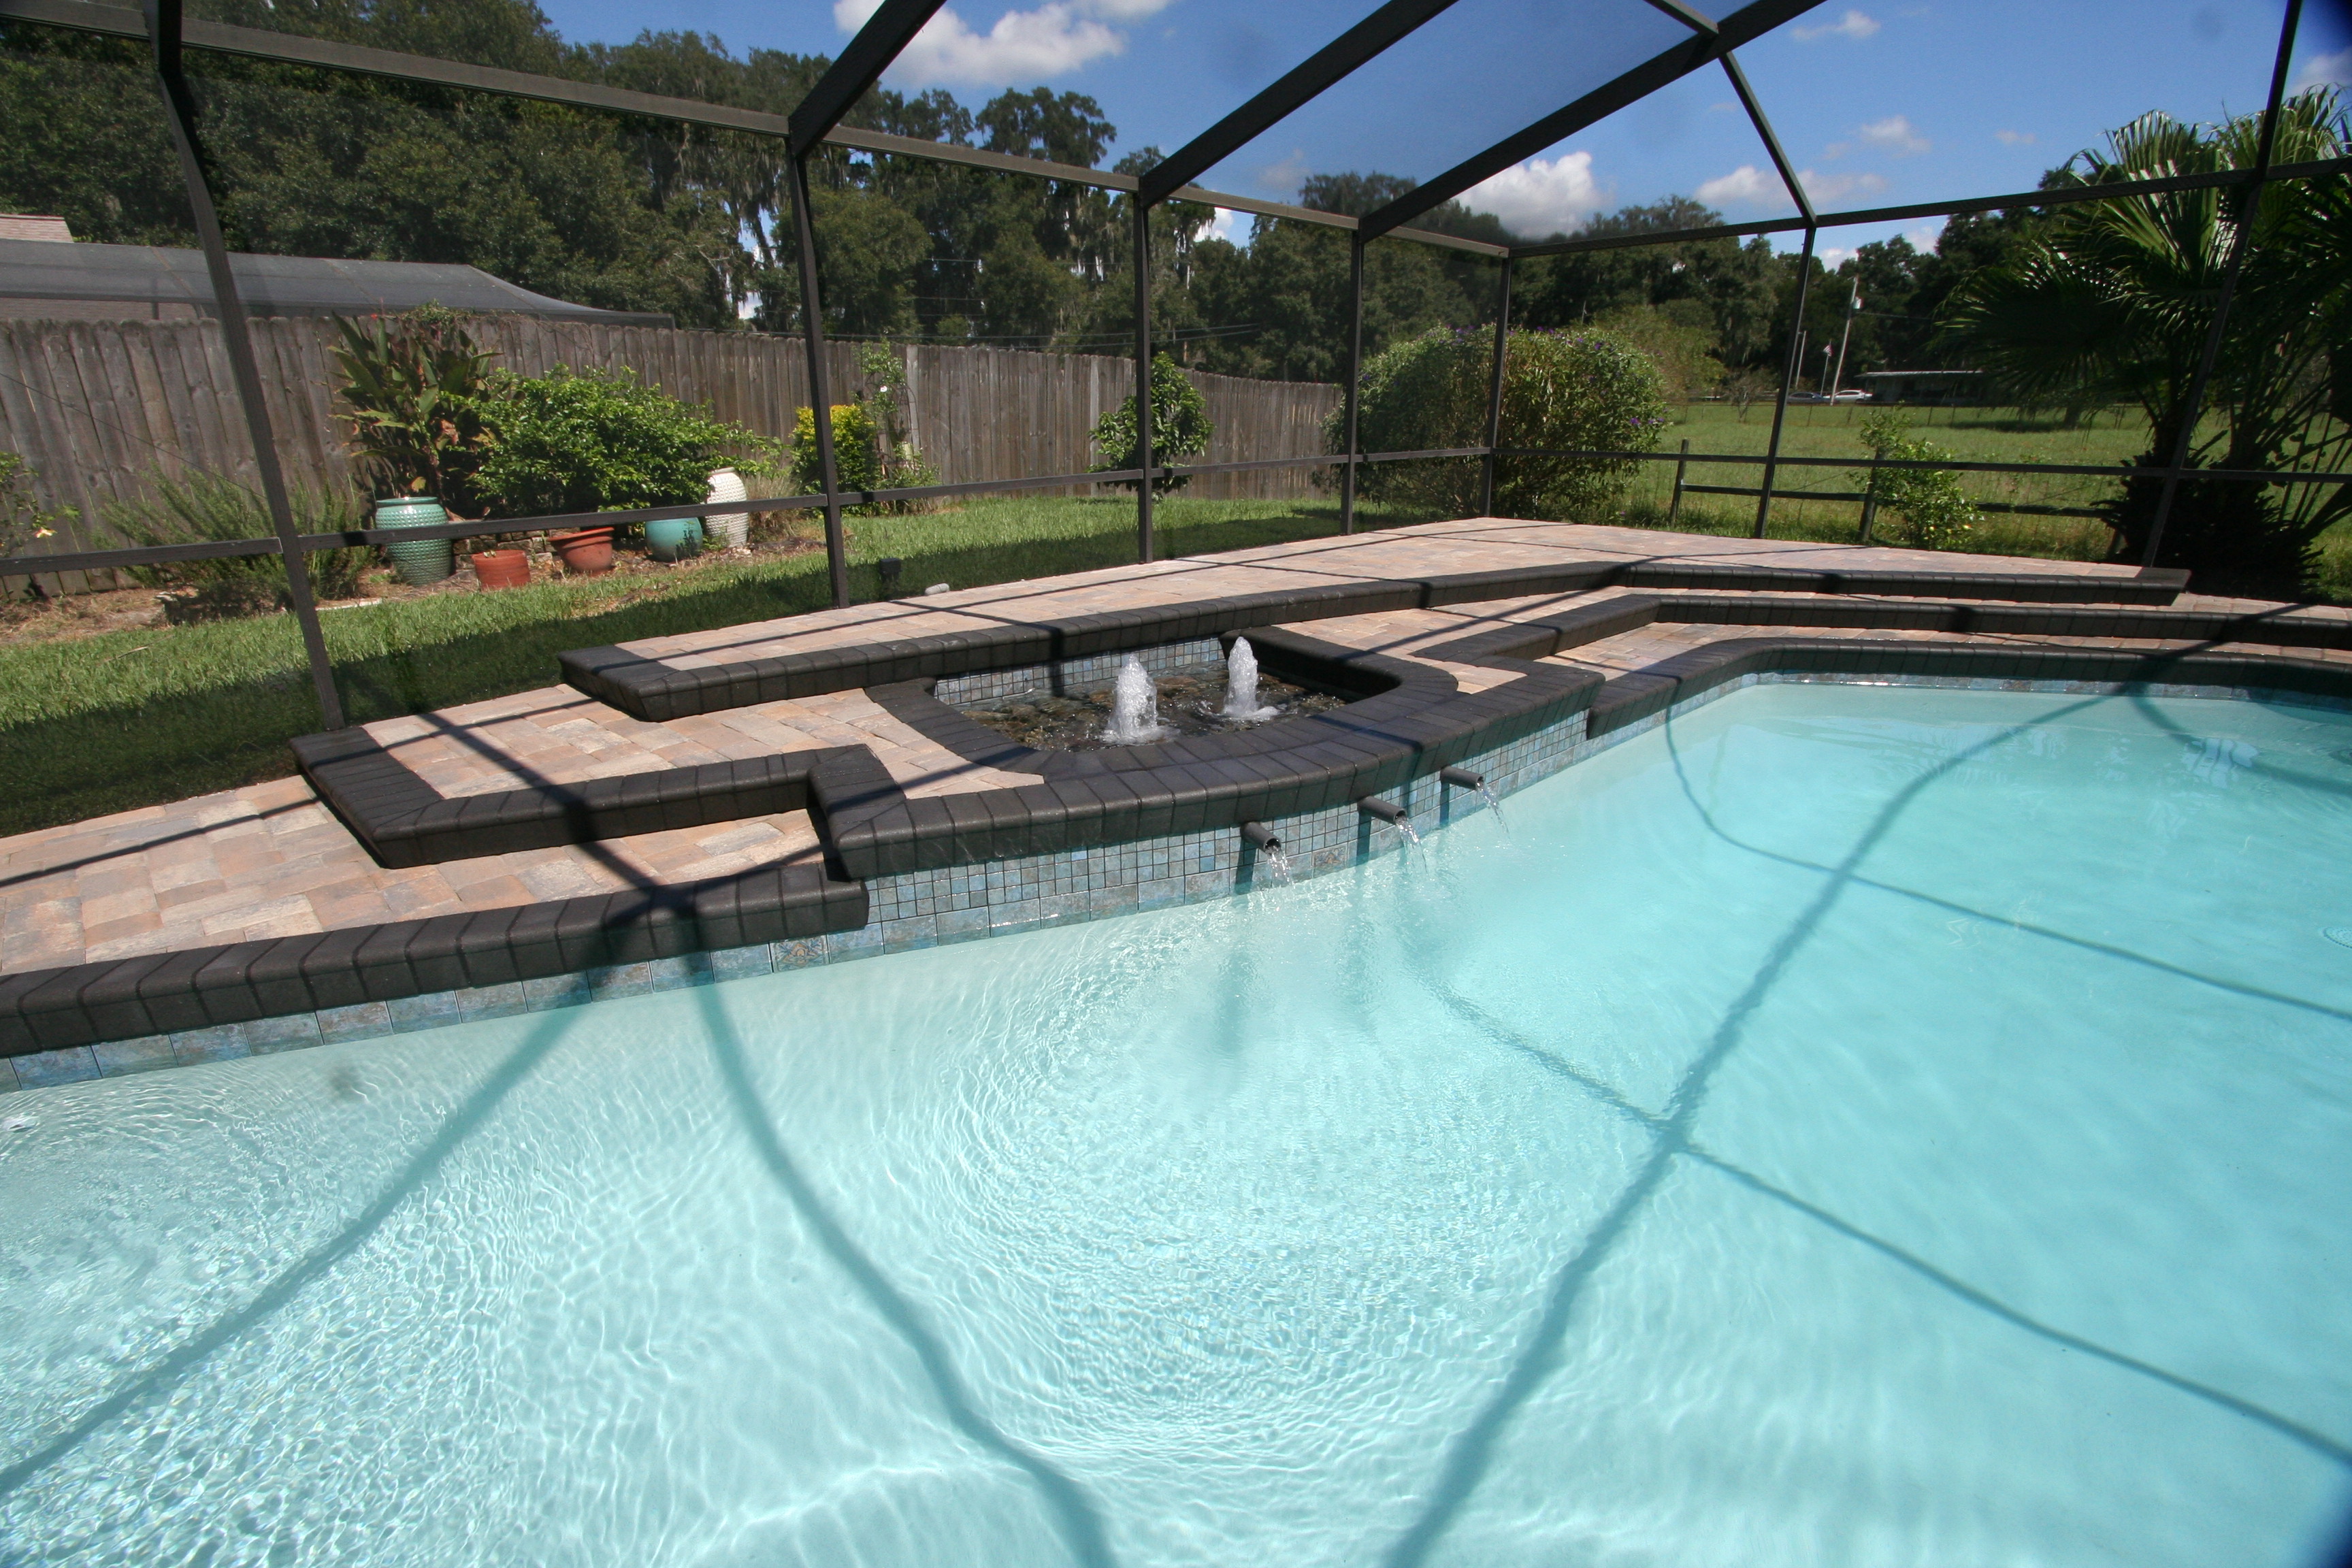 Remodel your swimming pool in Tampa, Dunedin, Clearwater, Oldsmar, Safety Harbor Fl